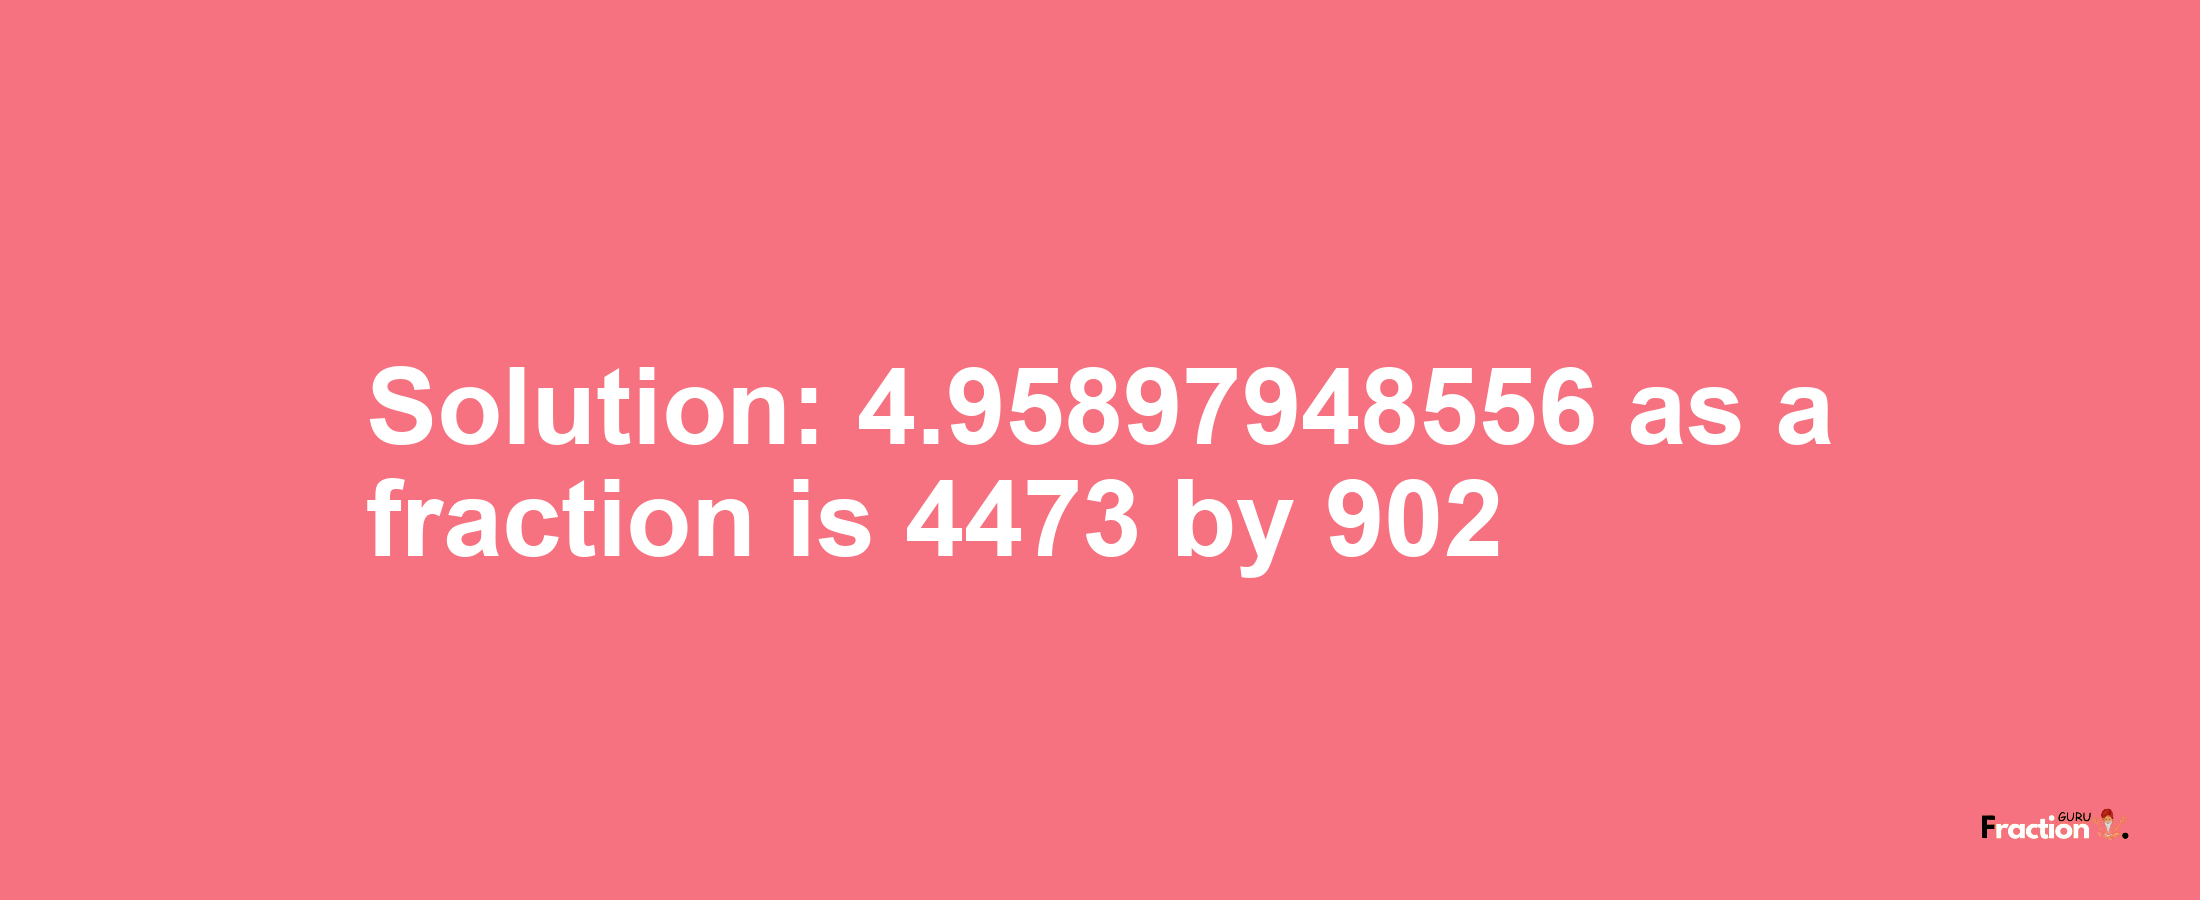 Solution:4.95897948556 as a fraction is 4473/902